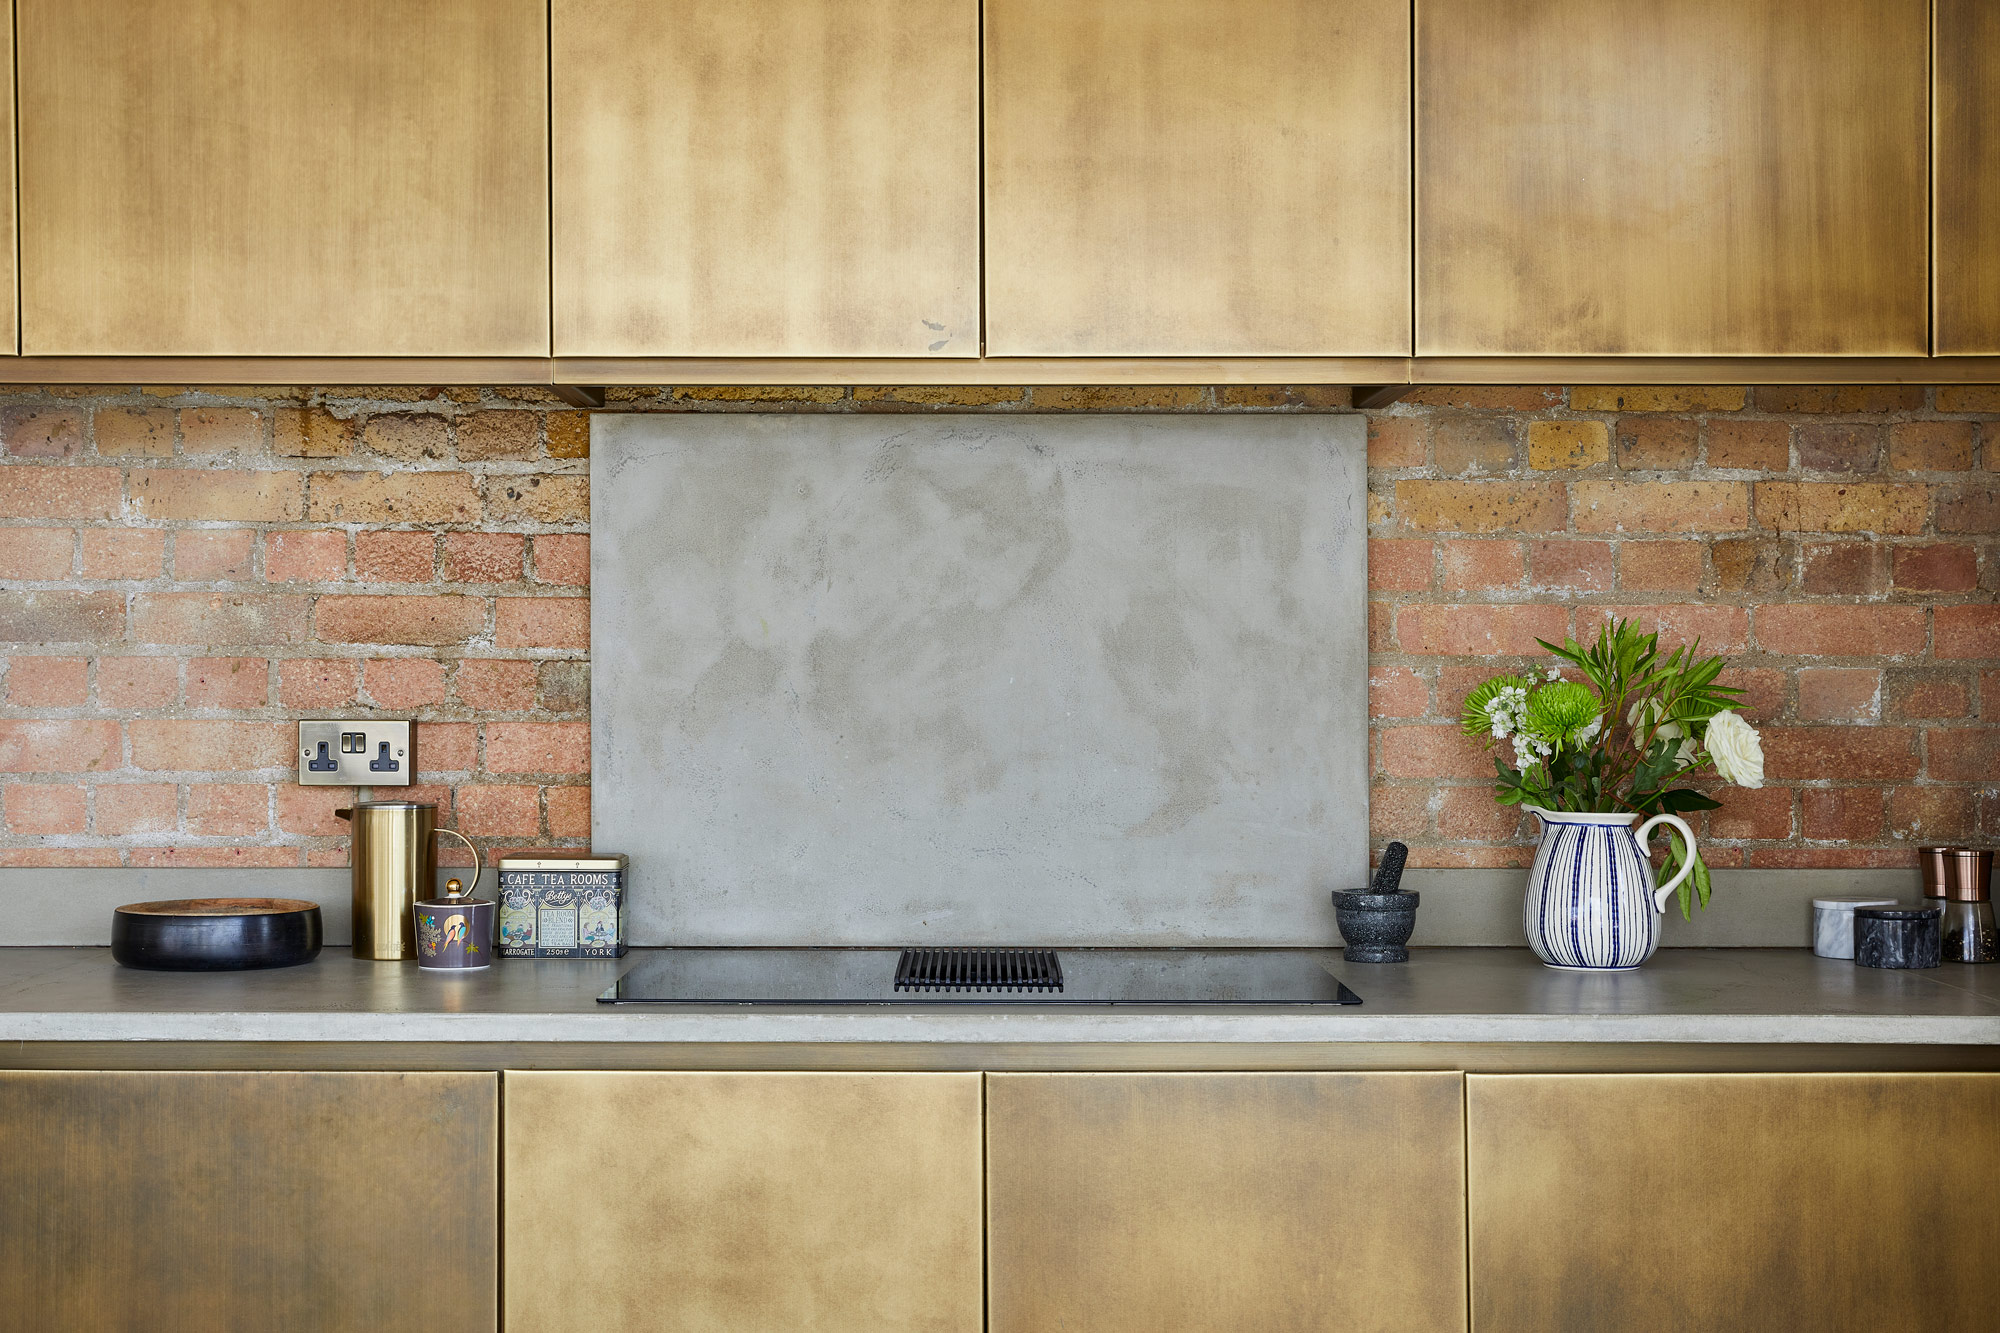 Brass metal kitchen cabinets with concrete countertops and backsplash